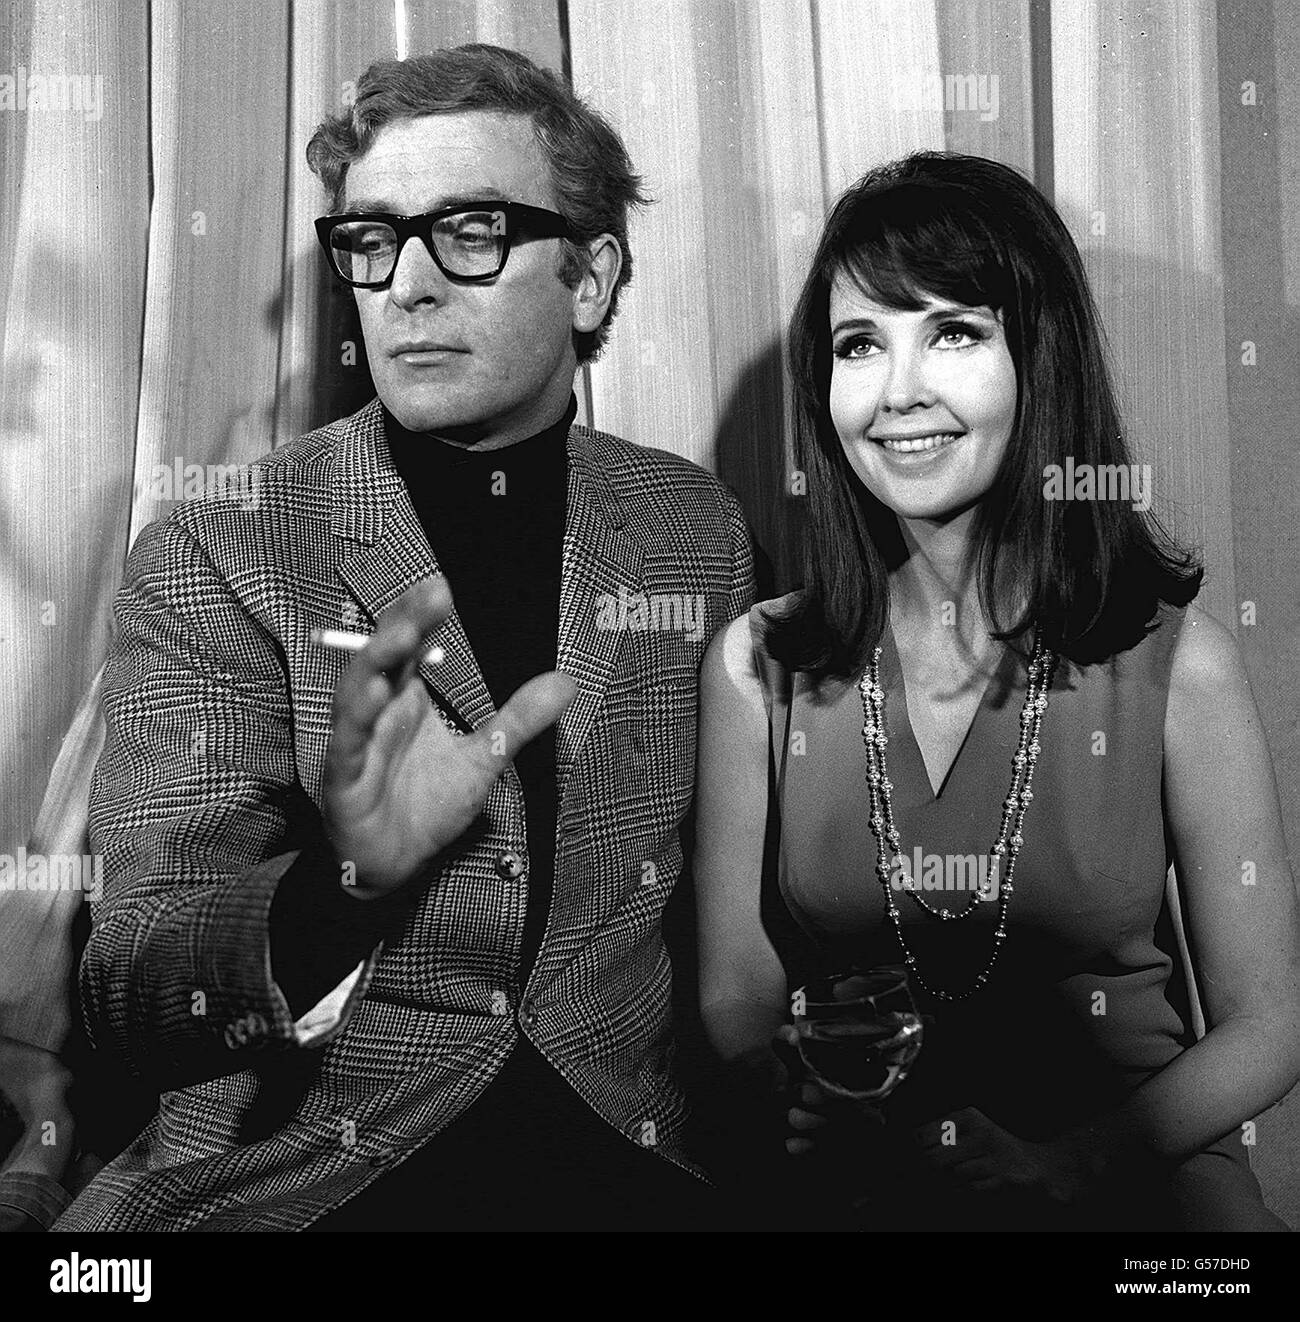 MICHAEL CAINE 1966: Meeting in a London restaurant are Michael Caine and Anjanette Comer who are to play in the film 'Funeral in Berlin', the screen version of Len Deighton's sequel to 'The Ipcress File'. Caine will be recreating the role of spy Harry Palmer. Stock Photo